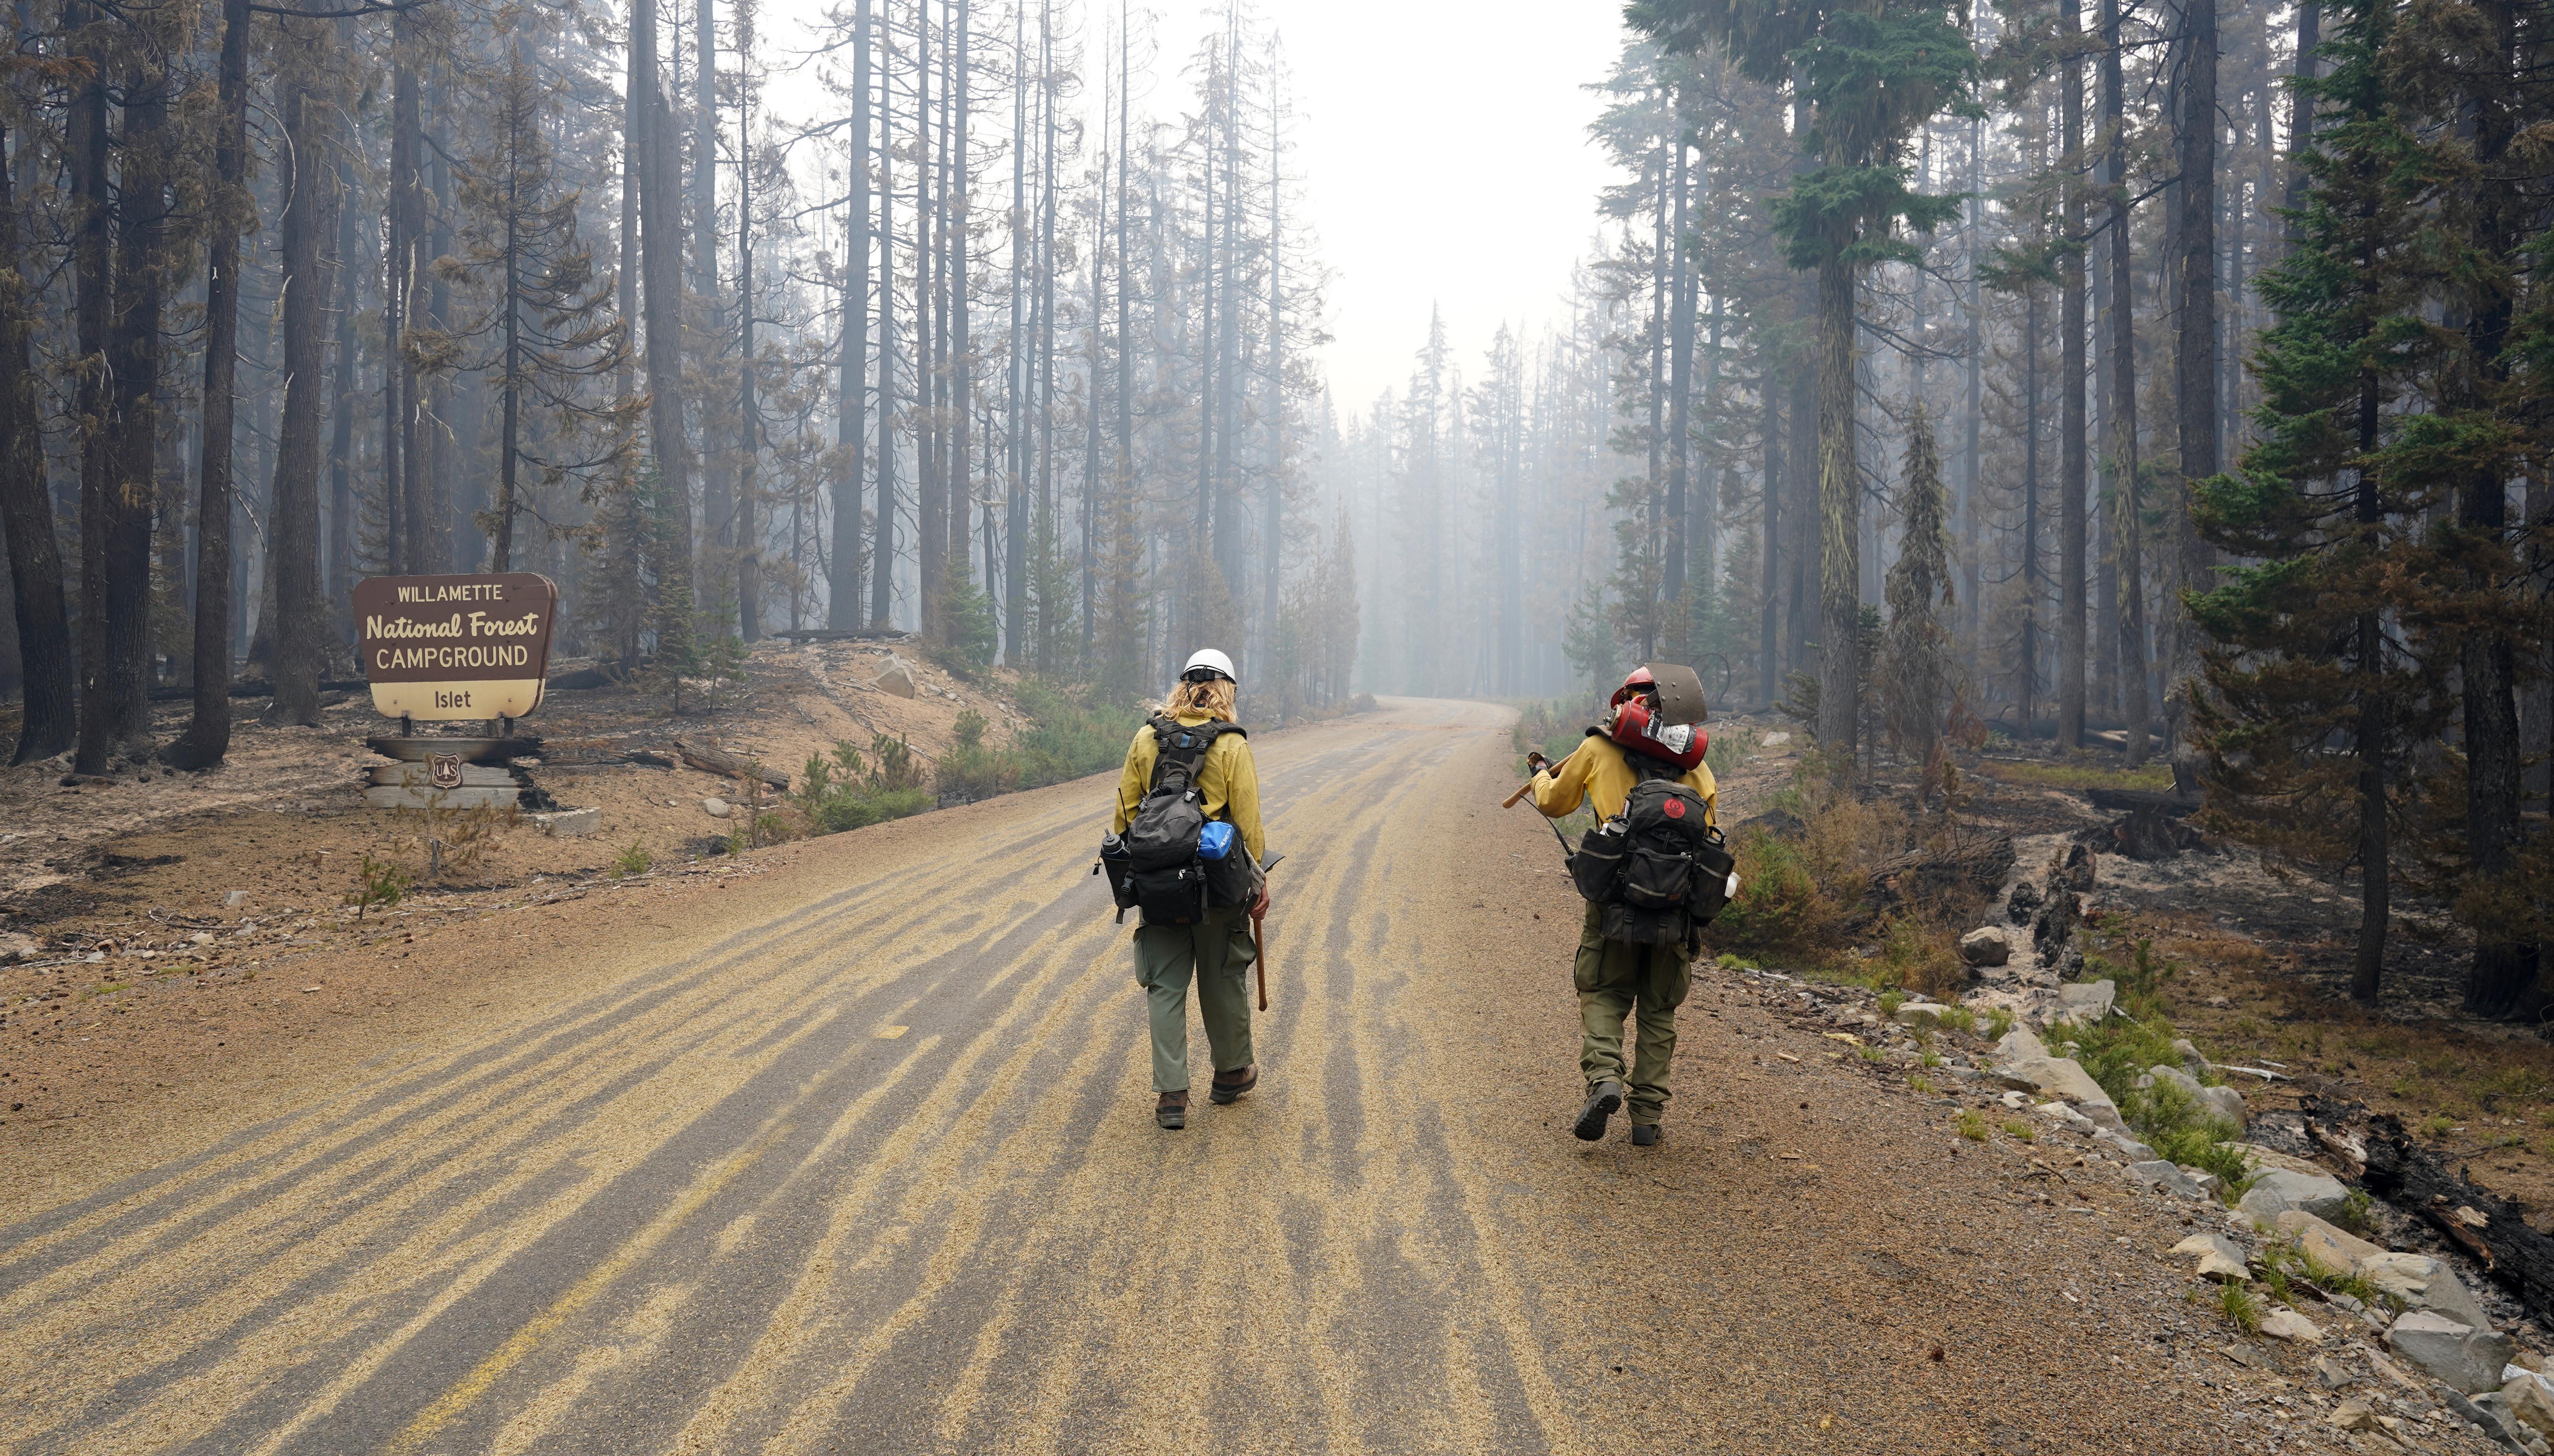 Two firefighters in personal protective equipment walk along a road lines with trees.  A sign on the left reads, Willamette National Forest  Campground, Islet.  Smoke hangs in the air through the trees and further down the road in front of them.